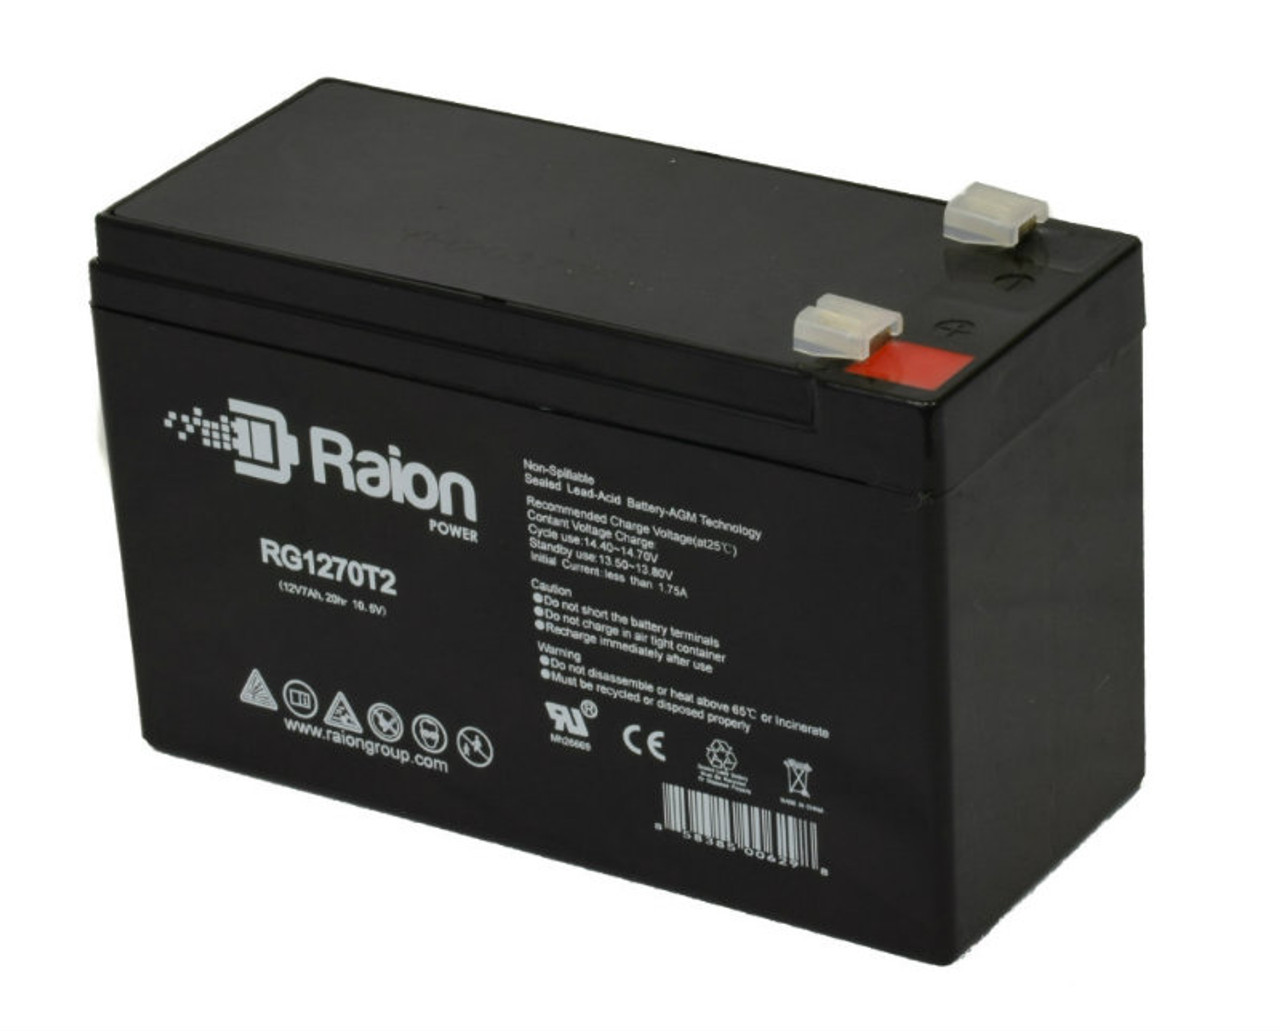 Raion Power RG1270T1 12V 7Ah Non-Spillable Replacement Battery for Long Way LW-6FM7.2J